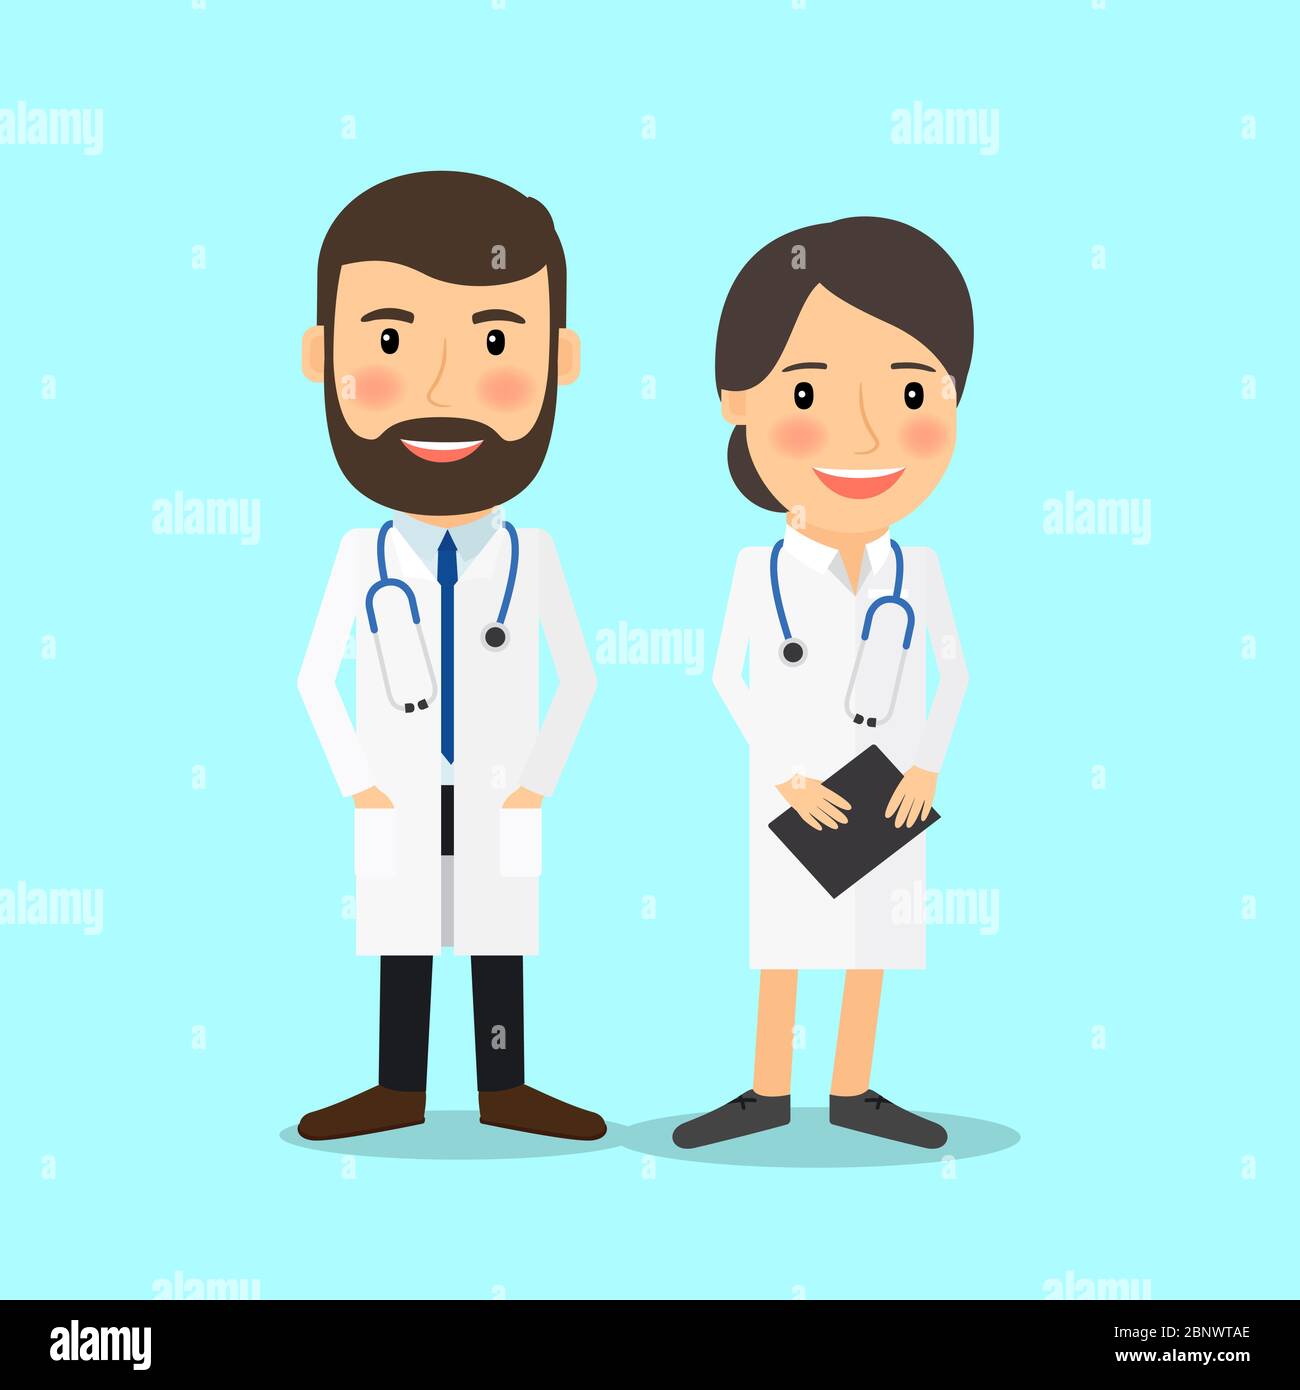 Medical doctor characters in cartoon style vector illustration Stock Vector